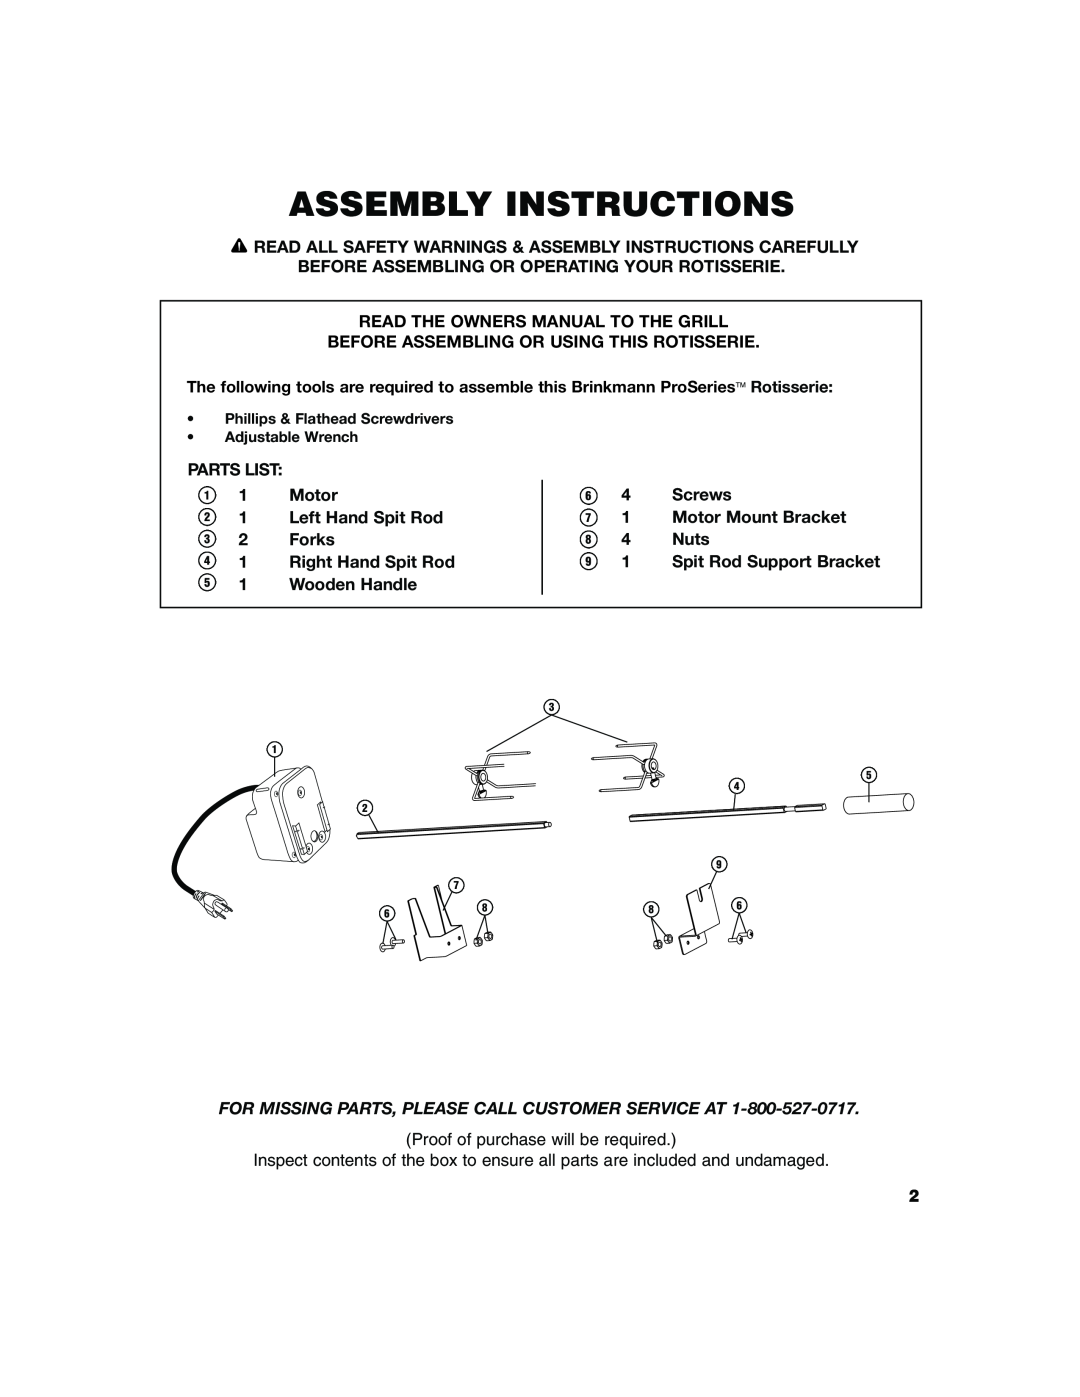 Brinkmann Grill owner manual Assembly Instructions, For Missing Parts, Please Call Customer Service At 